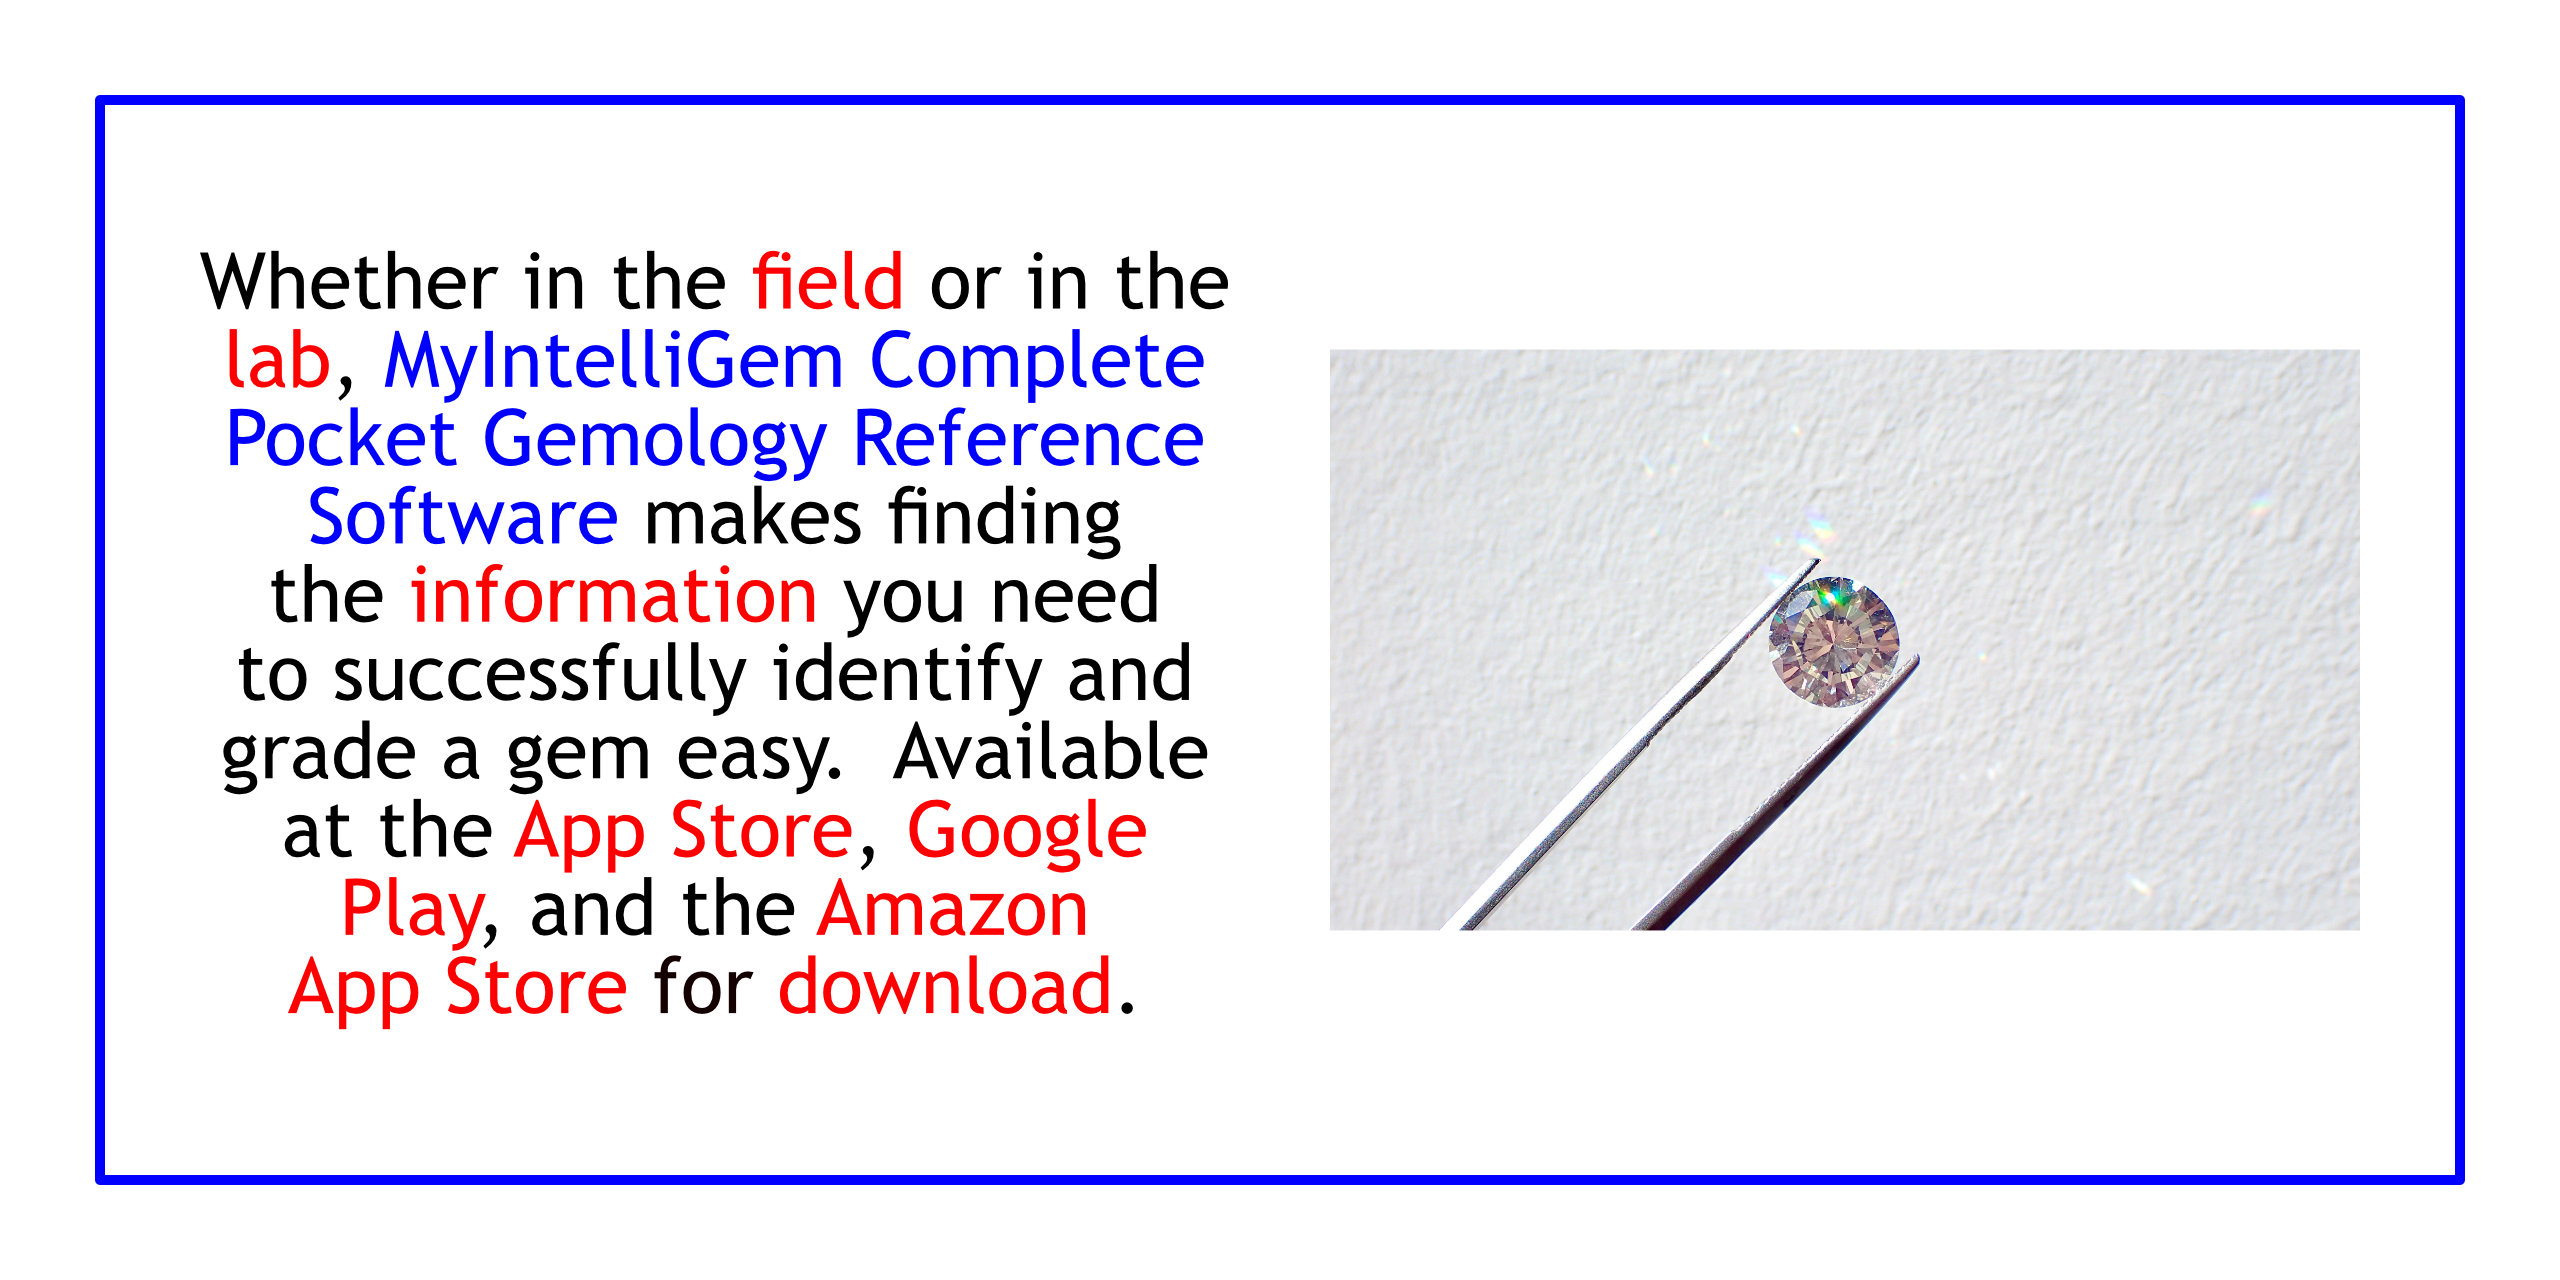 Whether in the field or the lab, MyIntelliGem Complete Pocket Gemology Reference makes finding the information you need to successfully identify and grade a gem easy.  AVAILABLE AT THE APP STORE, GOOGLE PLAY, AND THE AMAZON APP STORE.